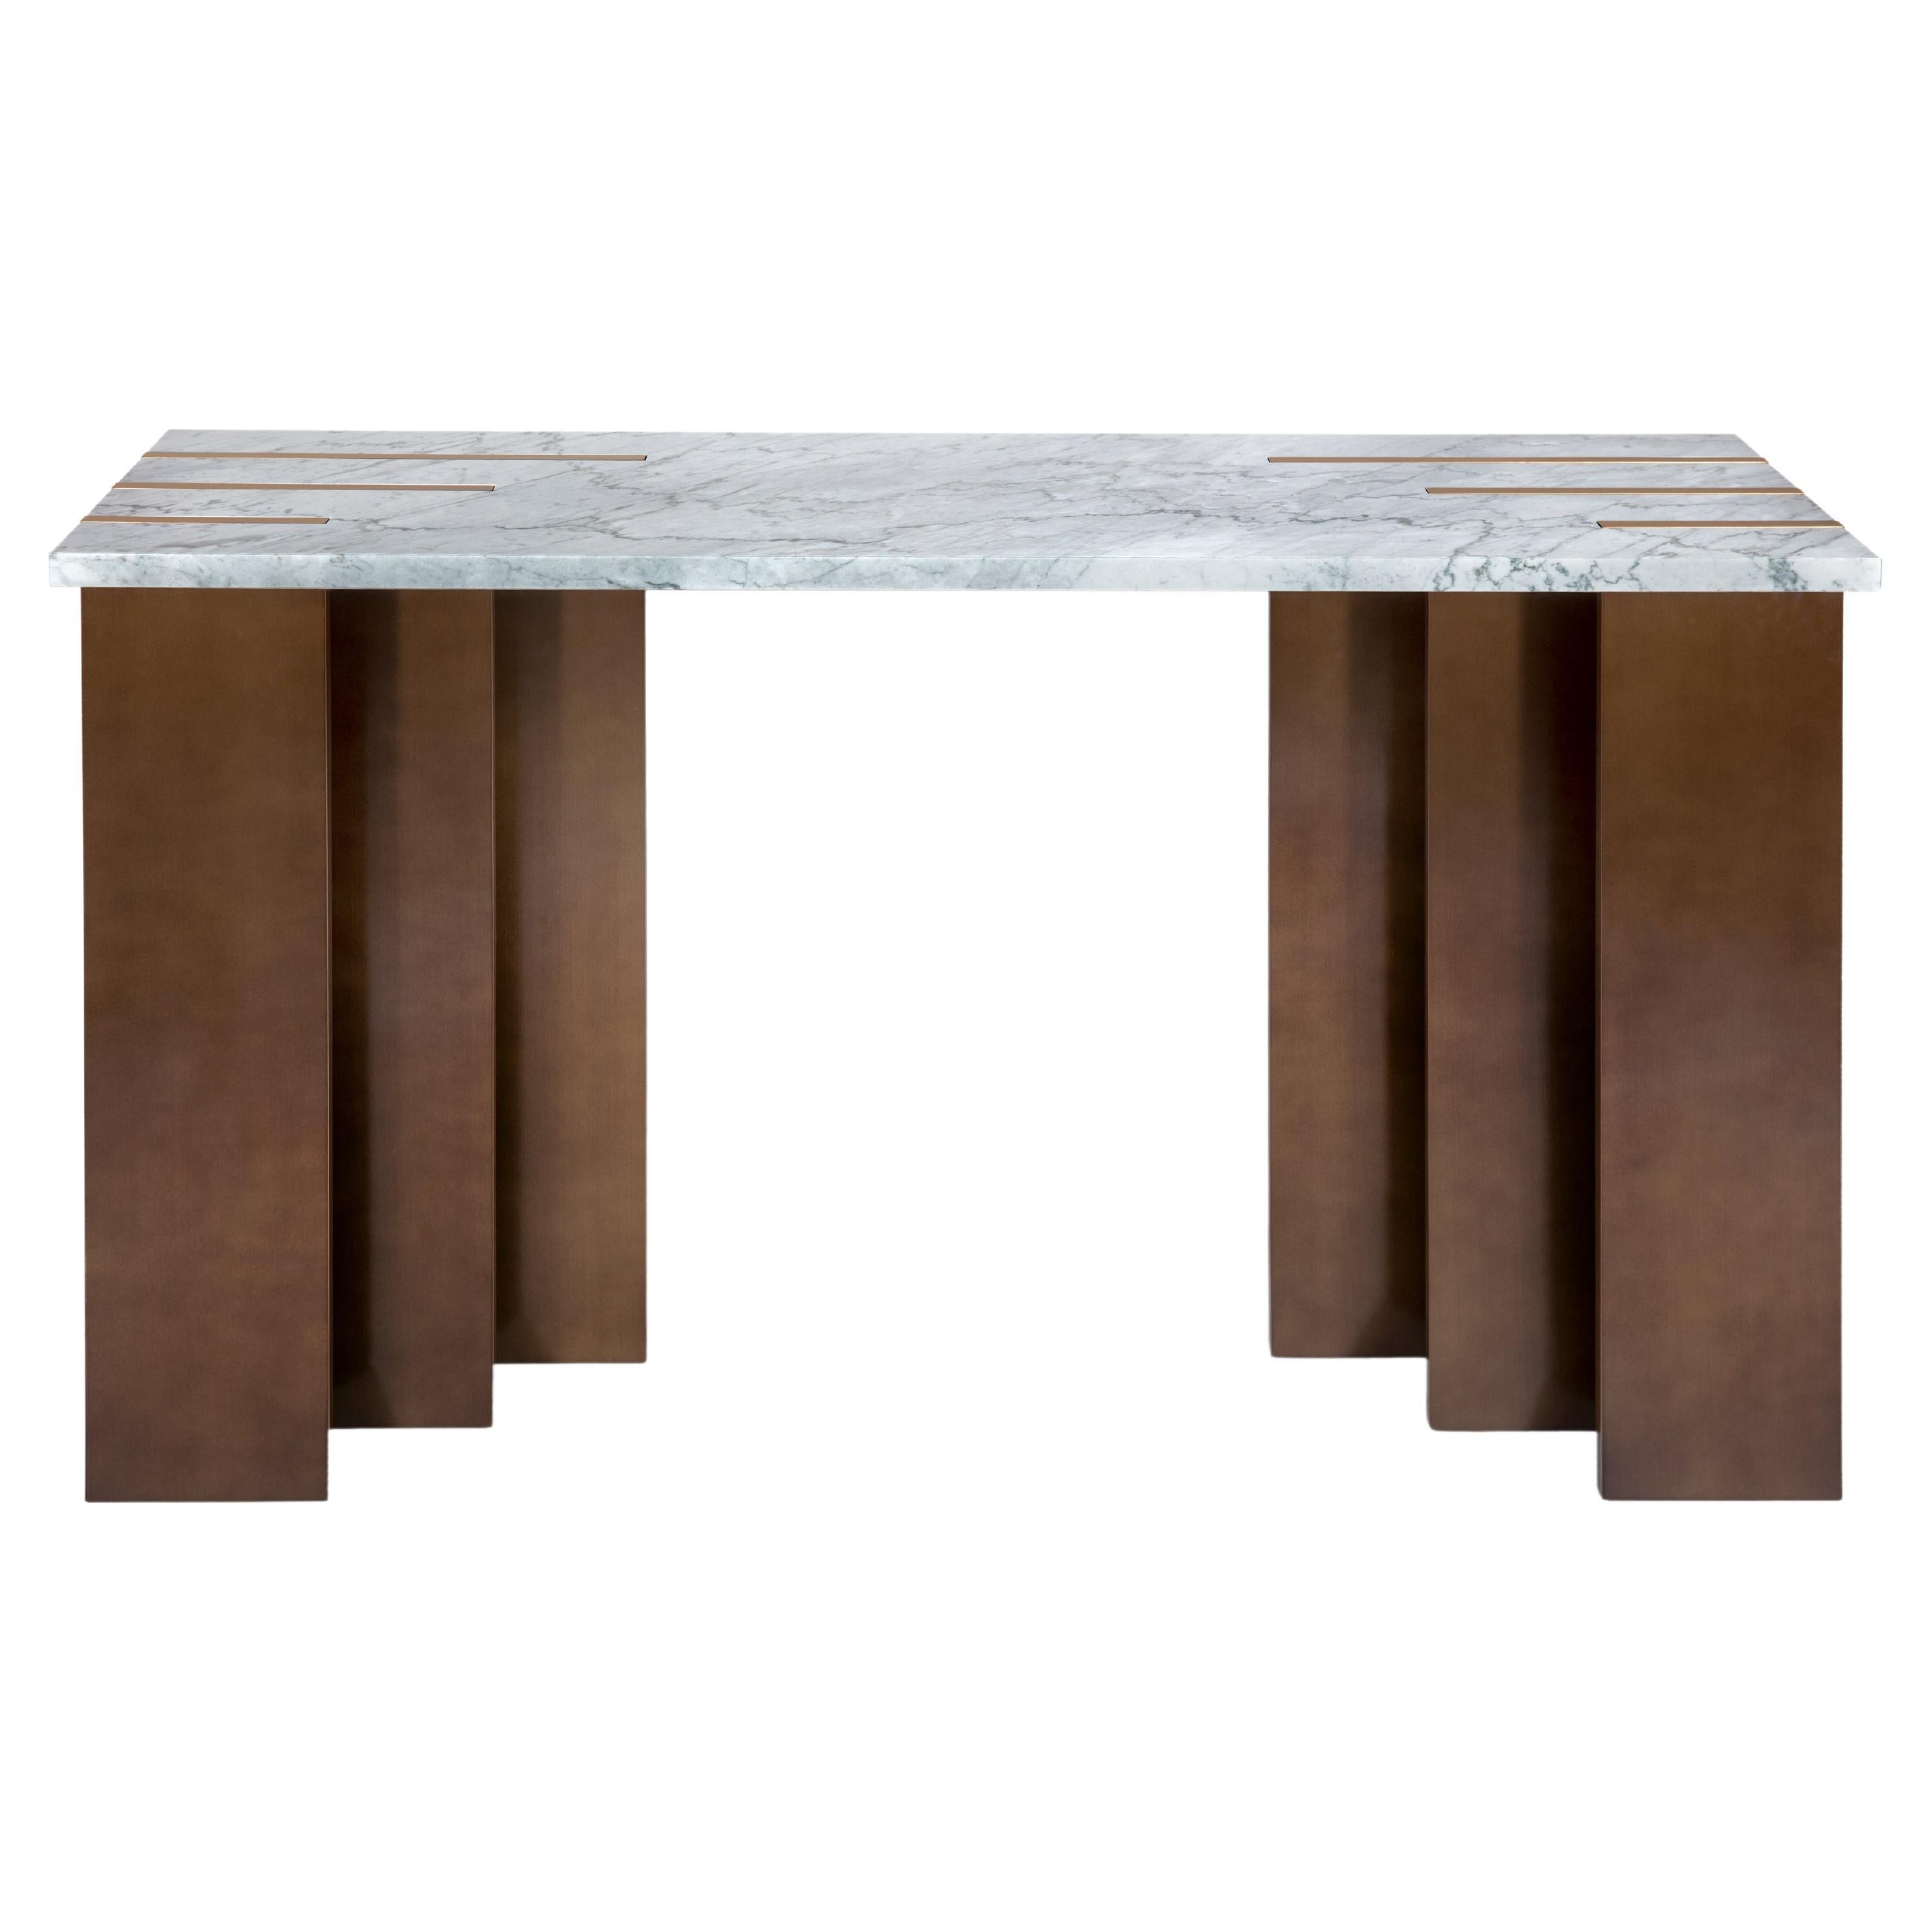 Pianist Carrara Marble Console by InsidherLand For Sale